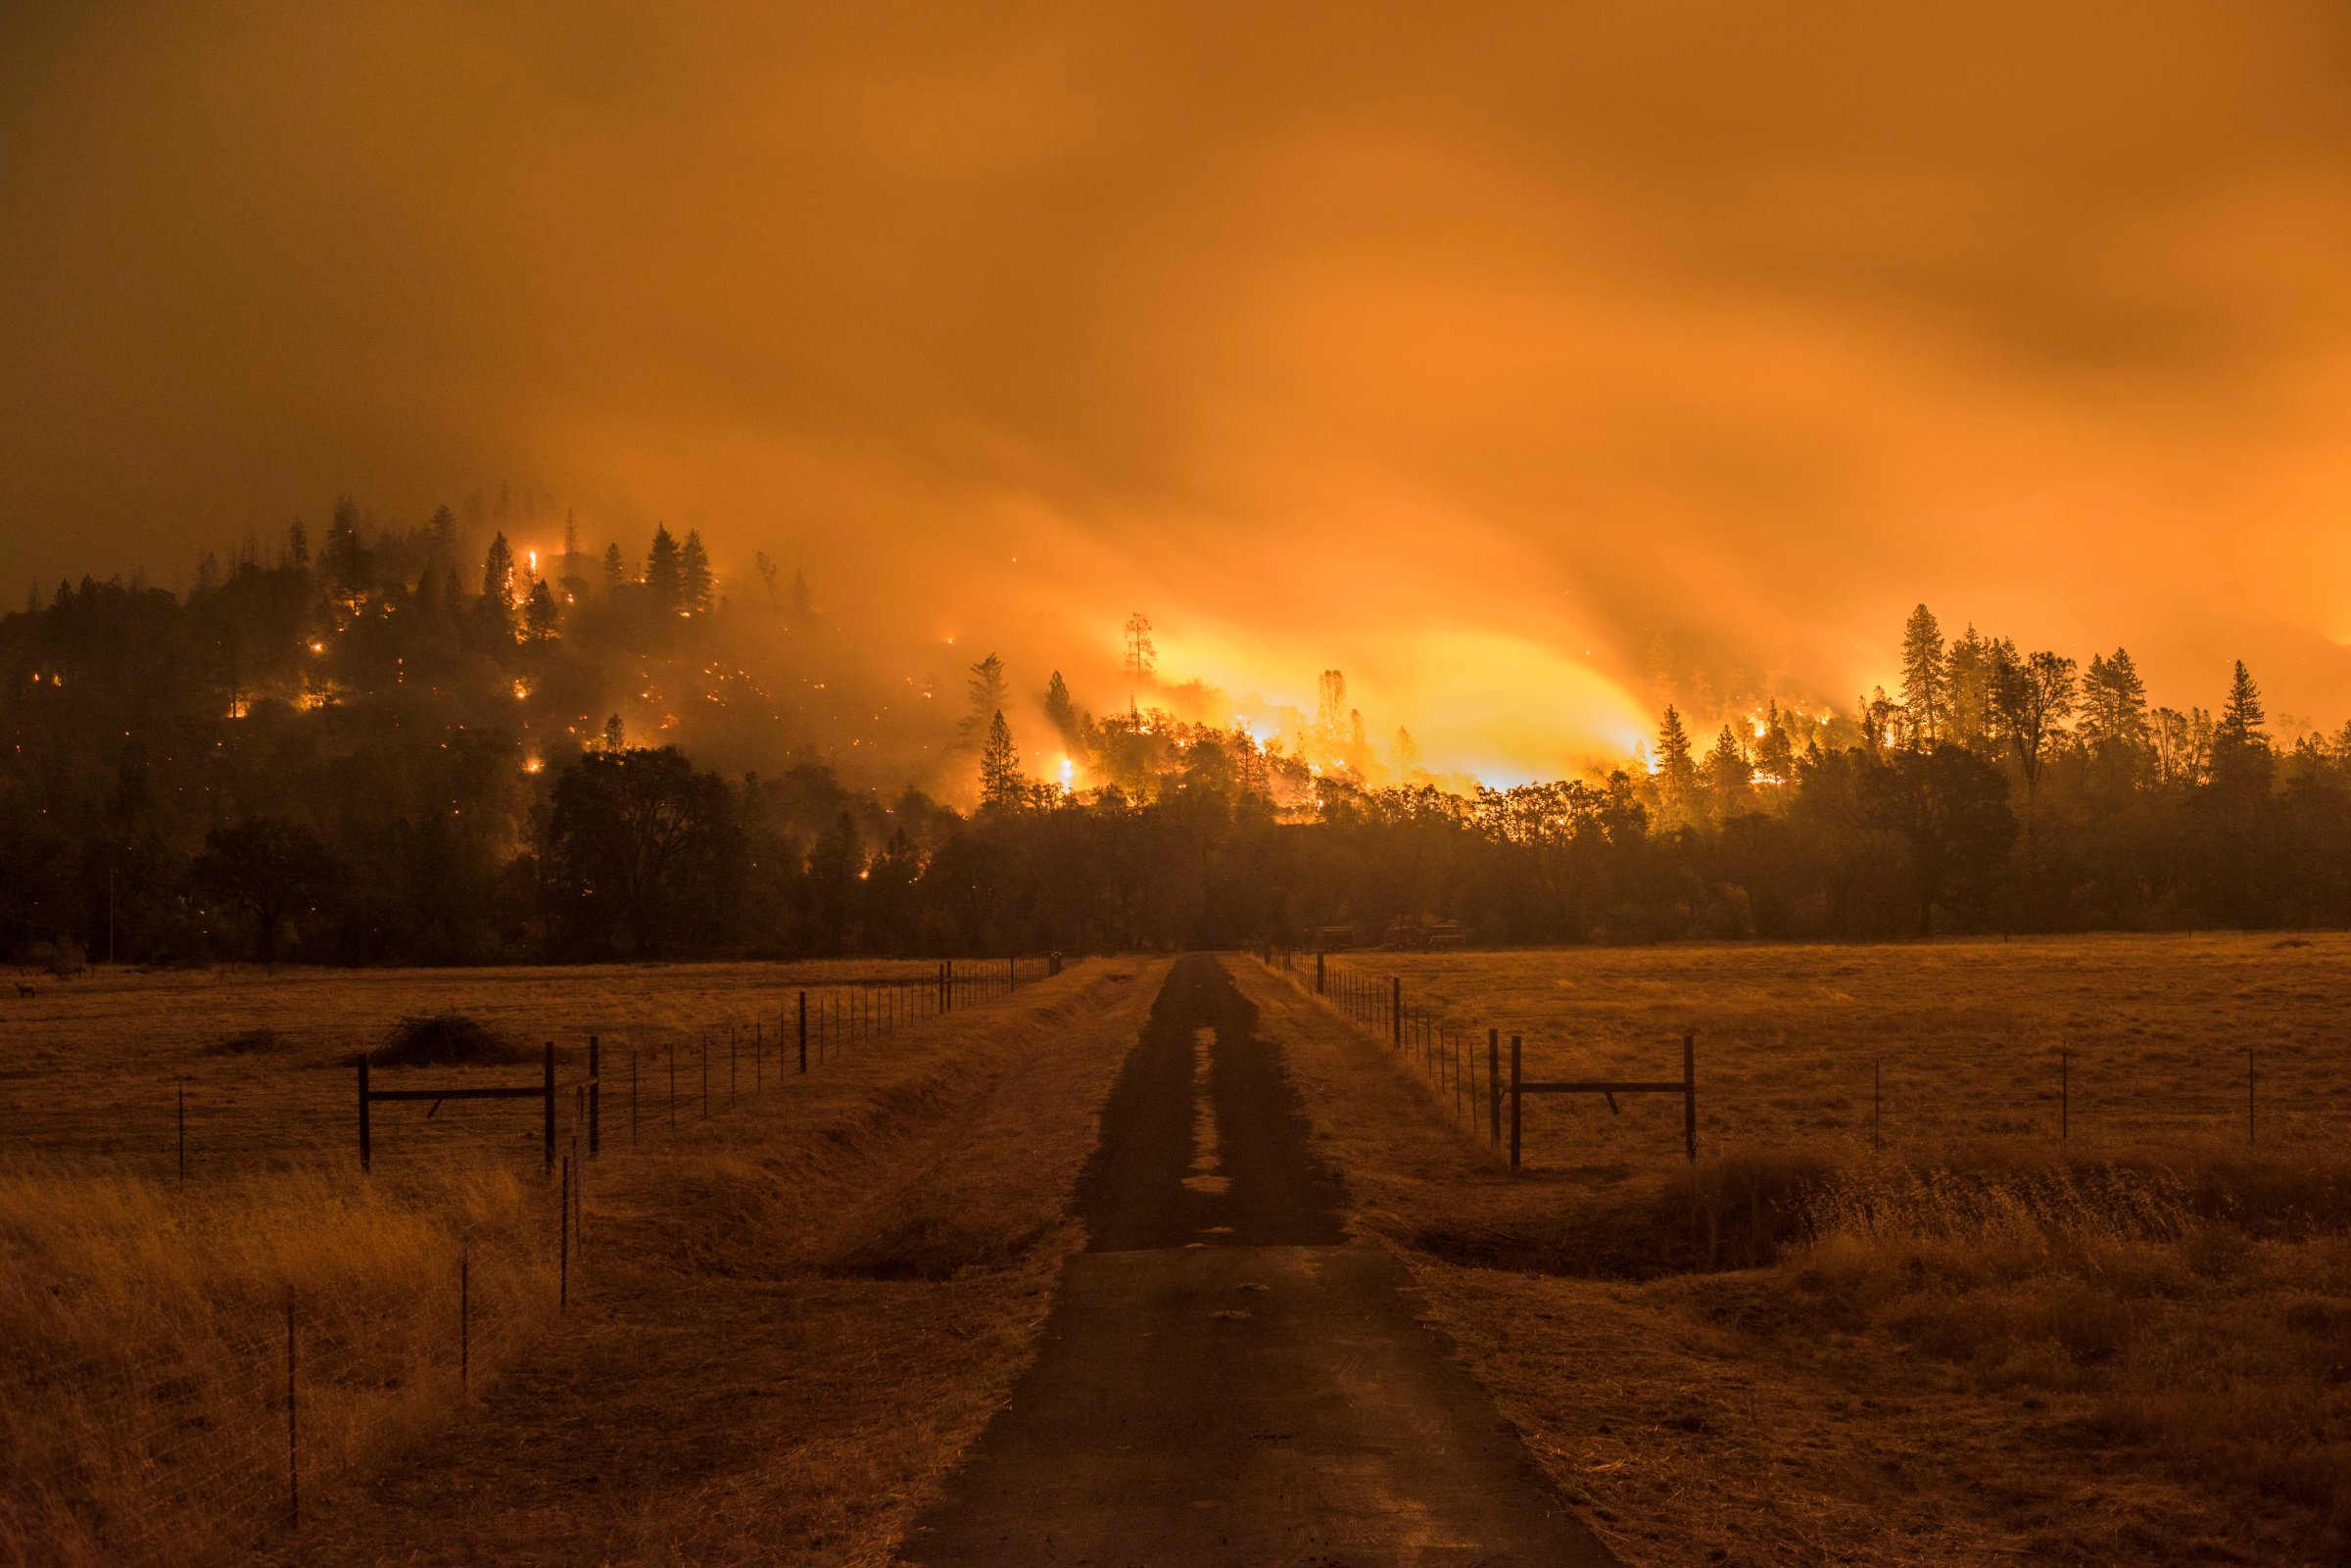 The Valley Fire burns off Highway 29 Sunday evening. Valley Fire in Lake and Sonoma Counties Sunday September 13th, 2015. As of Sunday evening the fire had burned over 50,000 acres and was 0% contained. The Associated Press reported that at least one person was killed due to the fire.